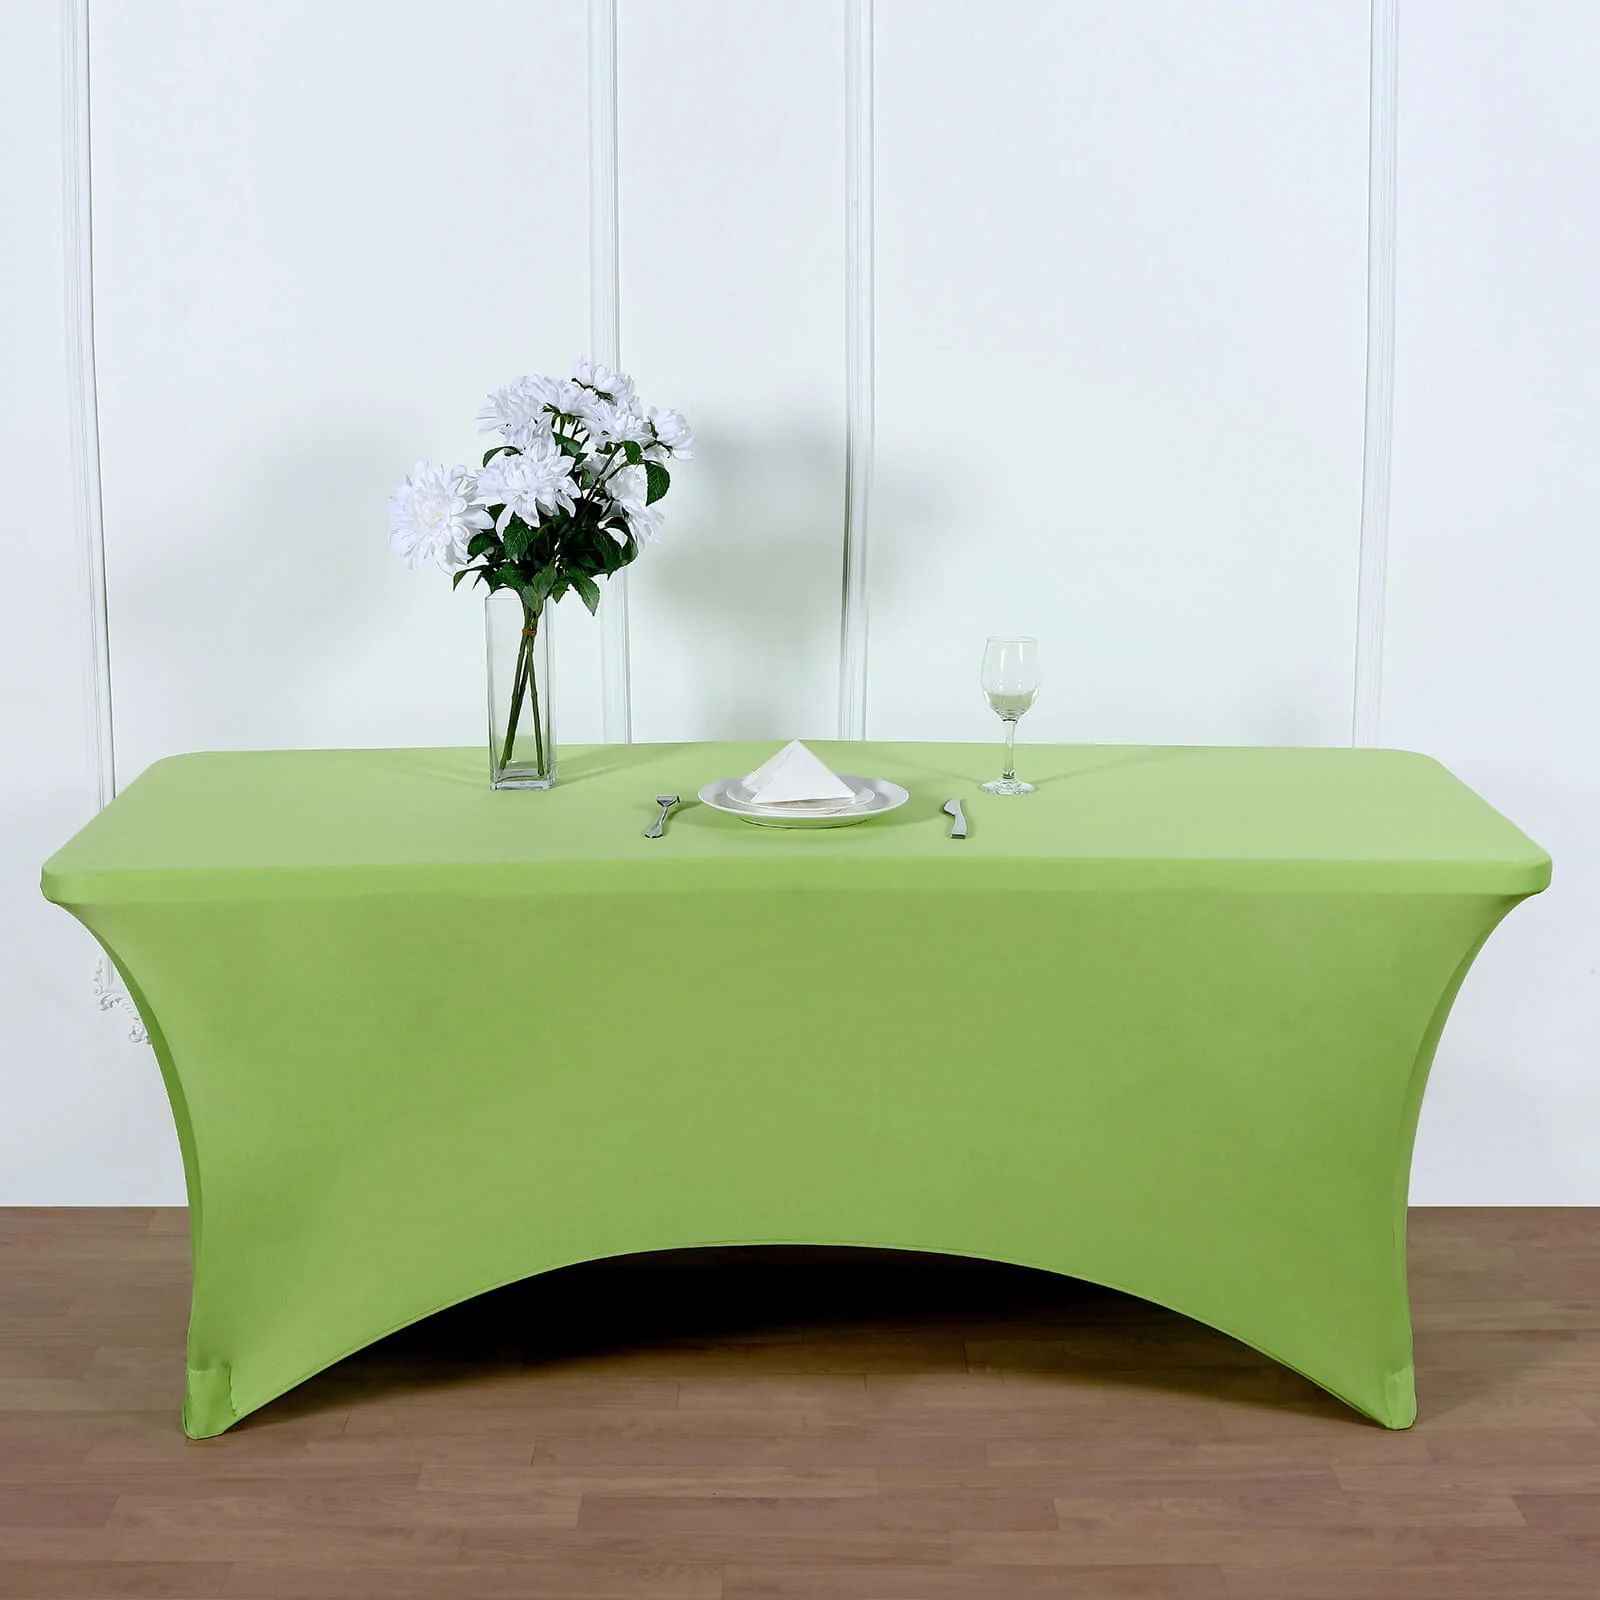 Apple Green - 6 Ft Rectangular Spandex Table Cover Wedding Party - £26.61 GBP